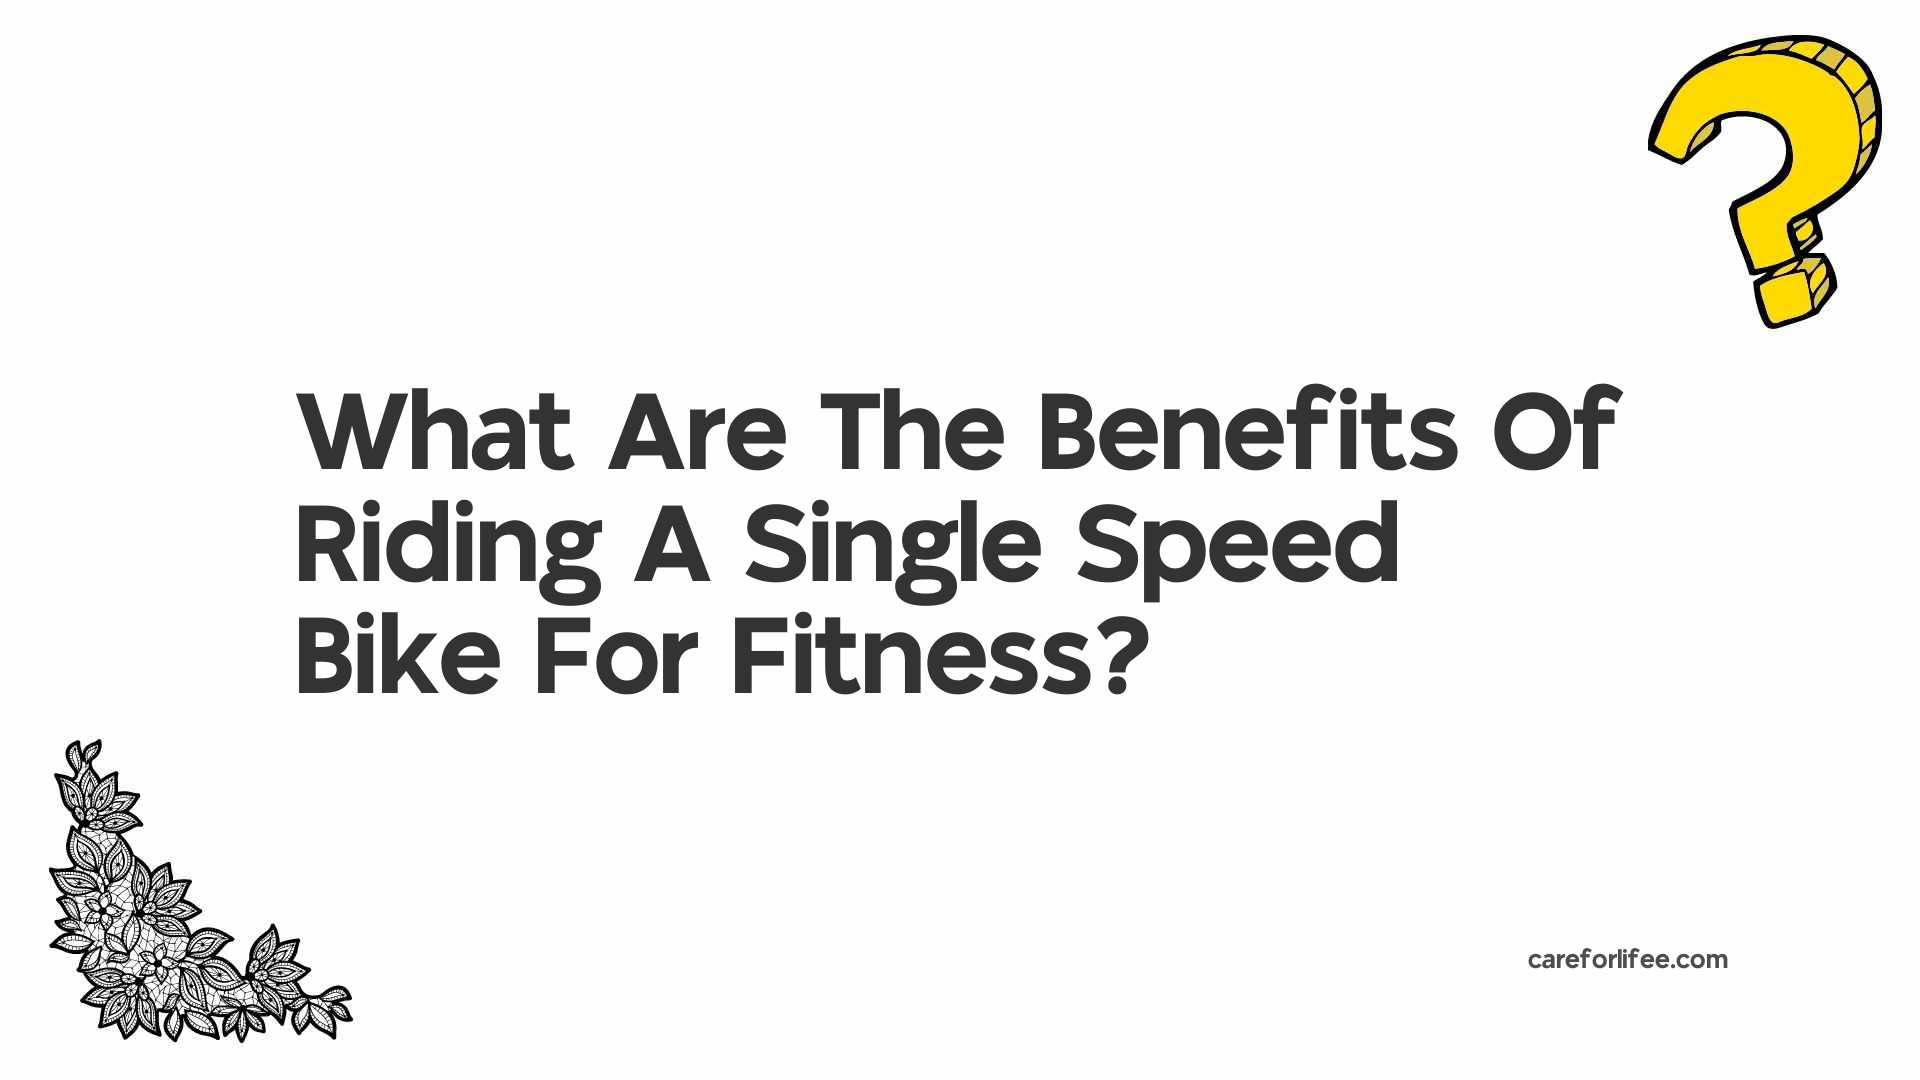 What Are The Benefits Of Riding A Single Speed Bike For Fitness?